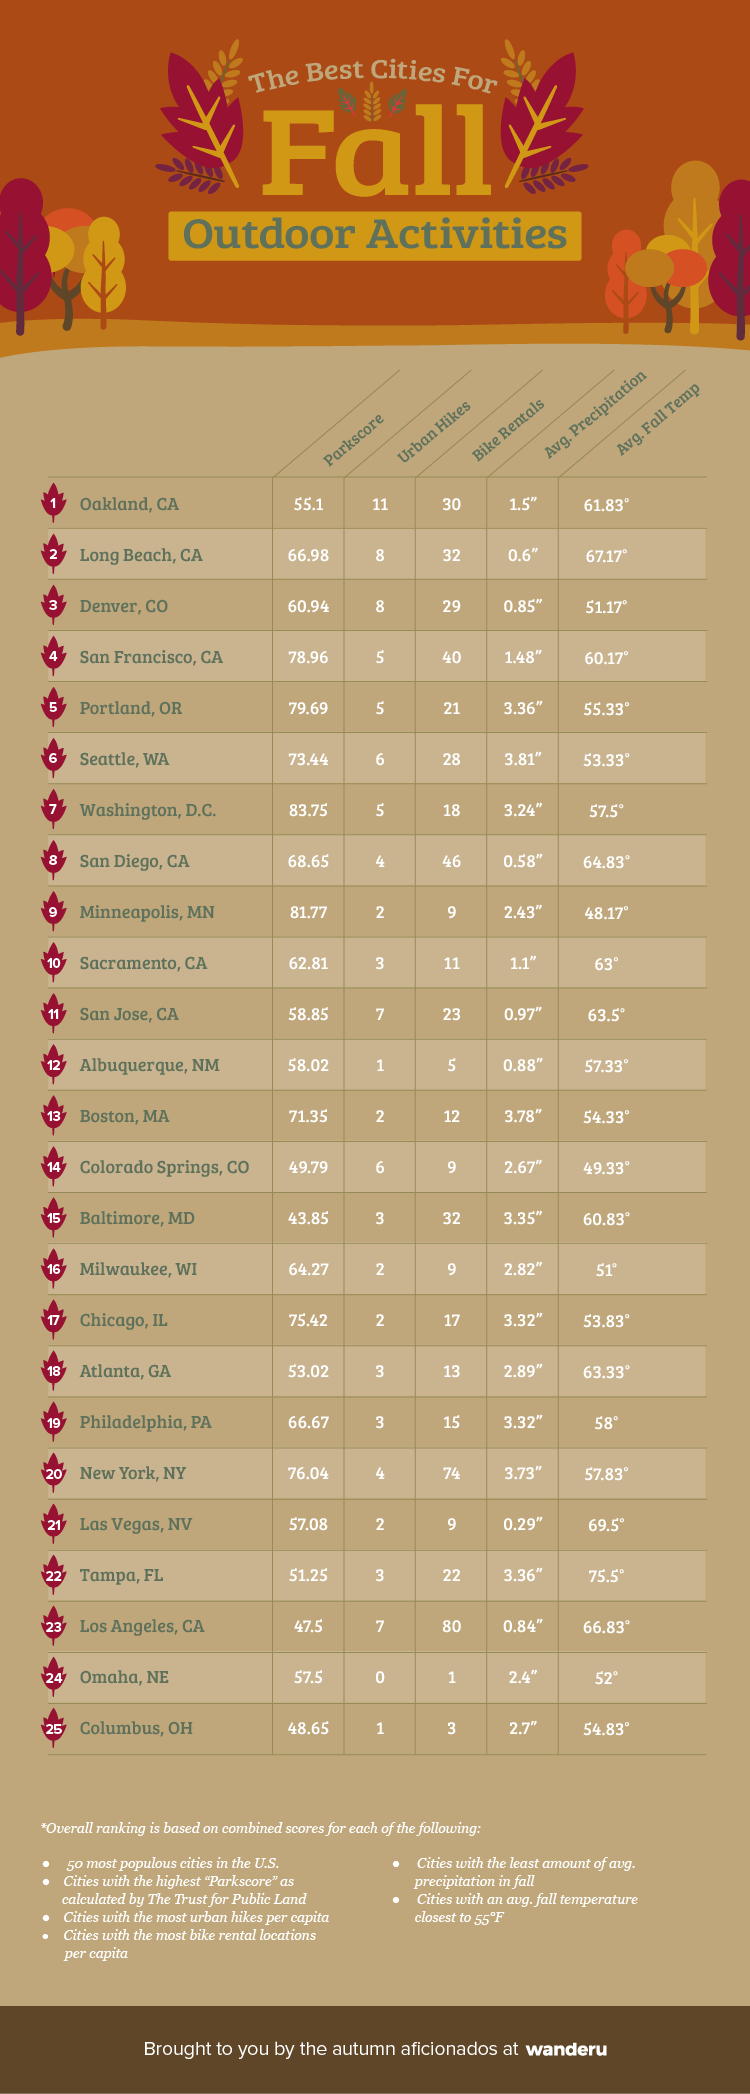 Ranking of top 25 cities for fall outdoors activities.